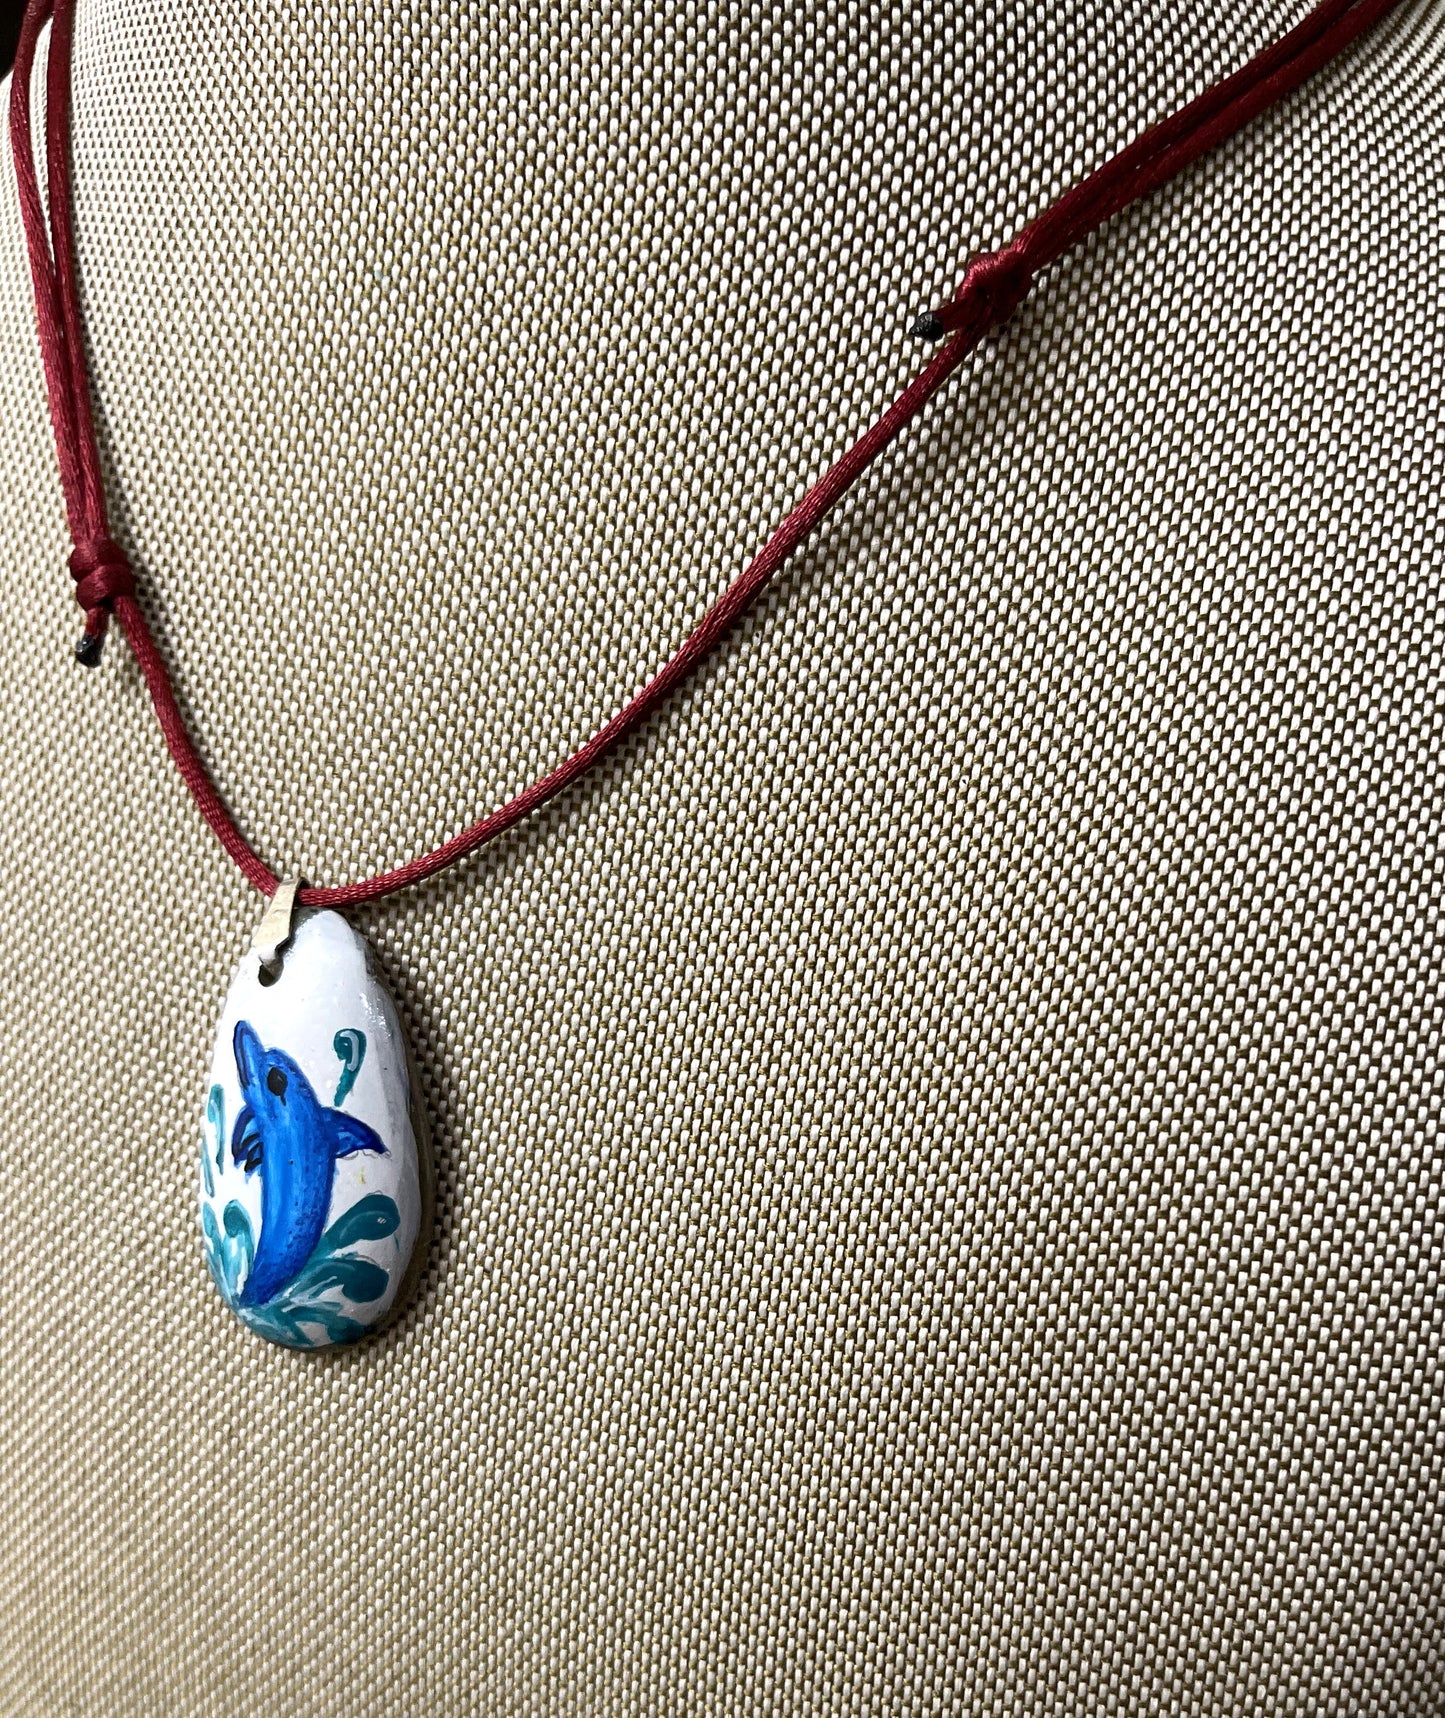 Etched Tagua Slice Blue Dolphin Carved Necklace Pendant Panama